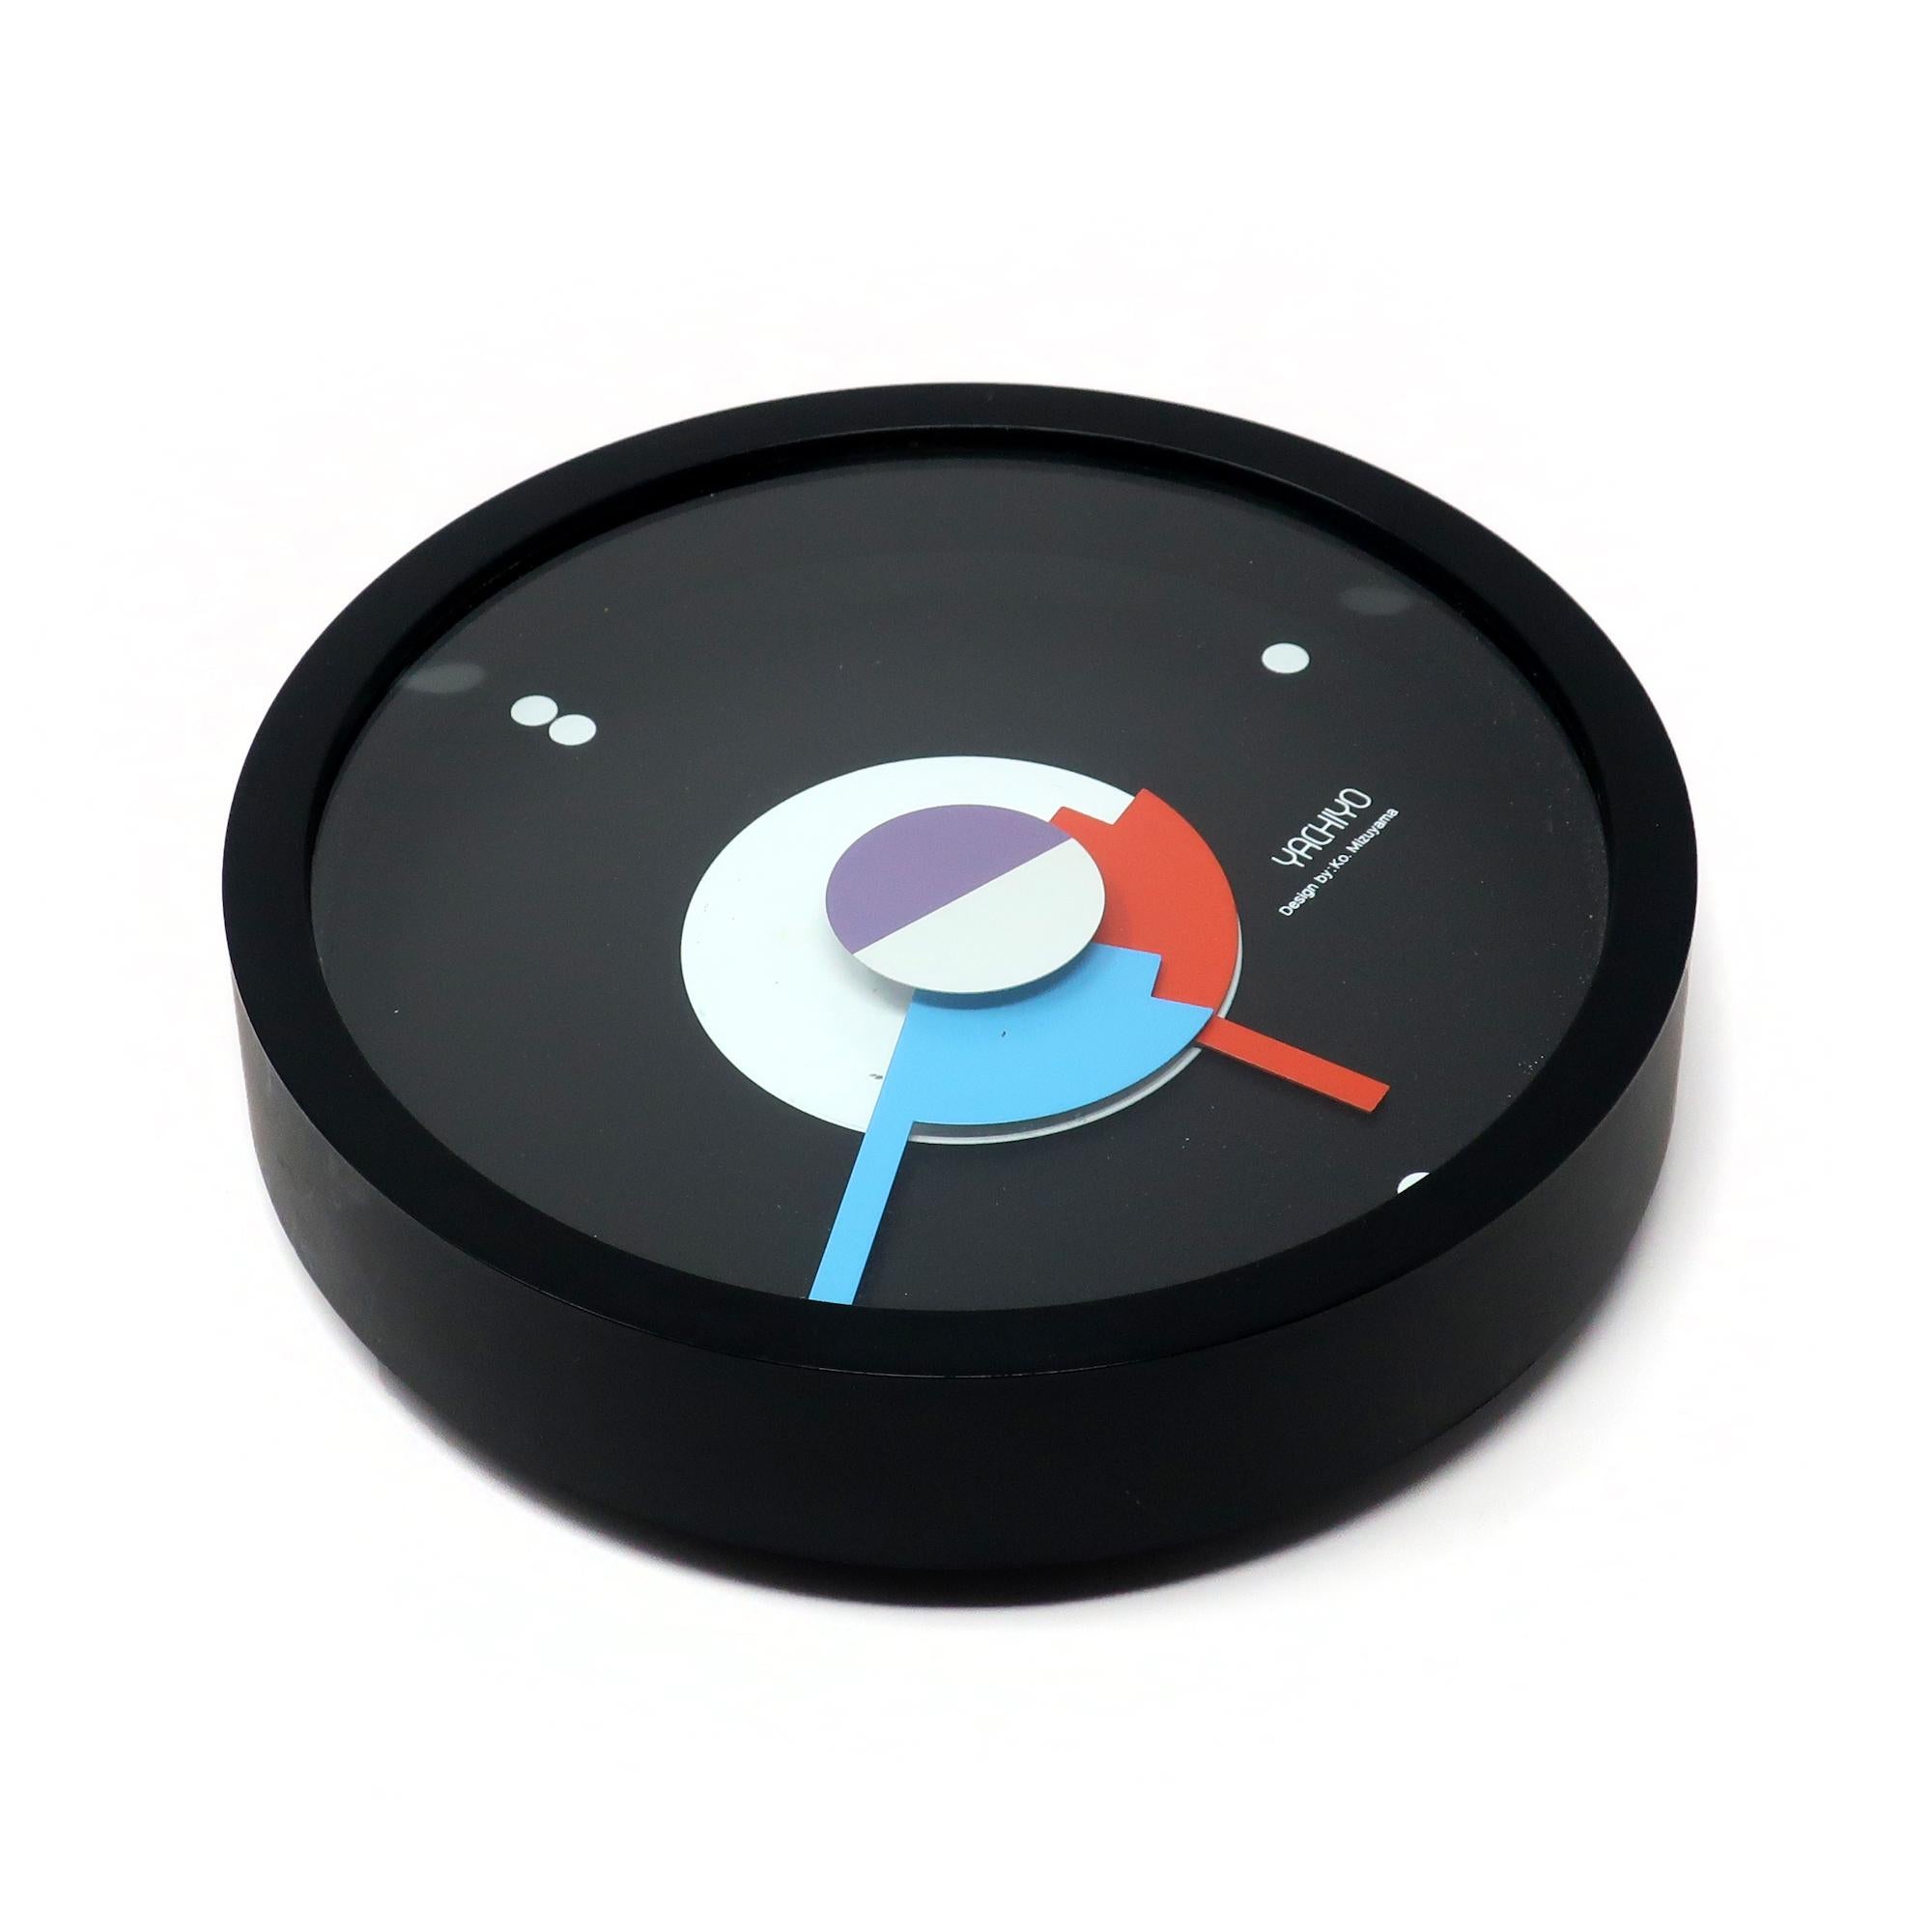 An outstanding round postmodern wall clock designed by Ko Mizuyama, a prolific Japanese designer of clocks in the 1980s.  It has a black plastic case, black face with dots for numbers, and graphical red, purple, white, and blue hands.

In good